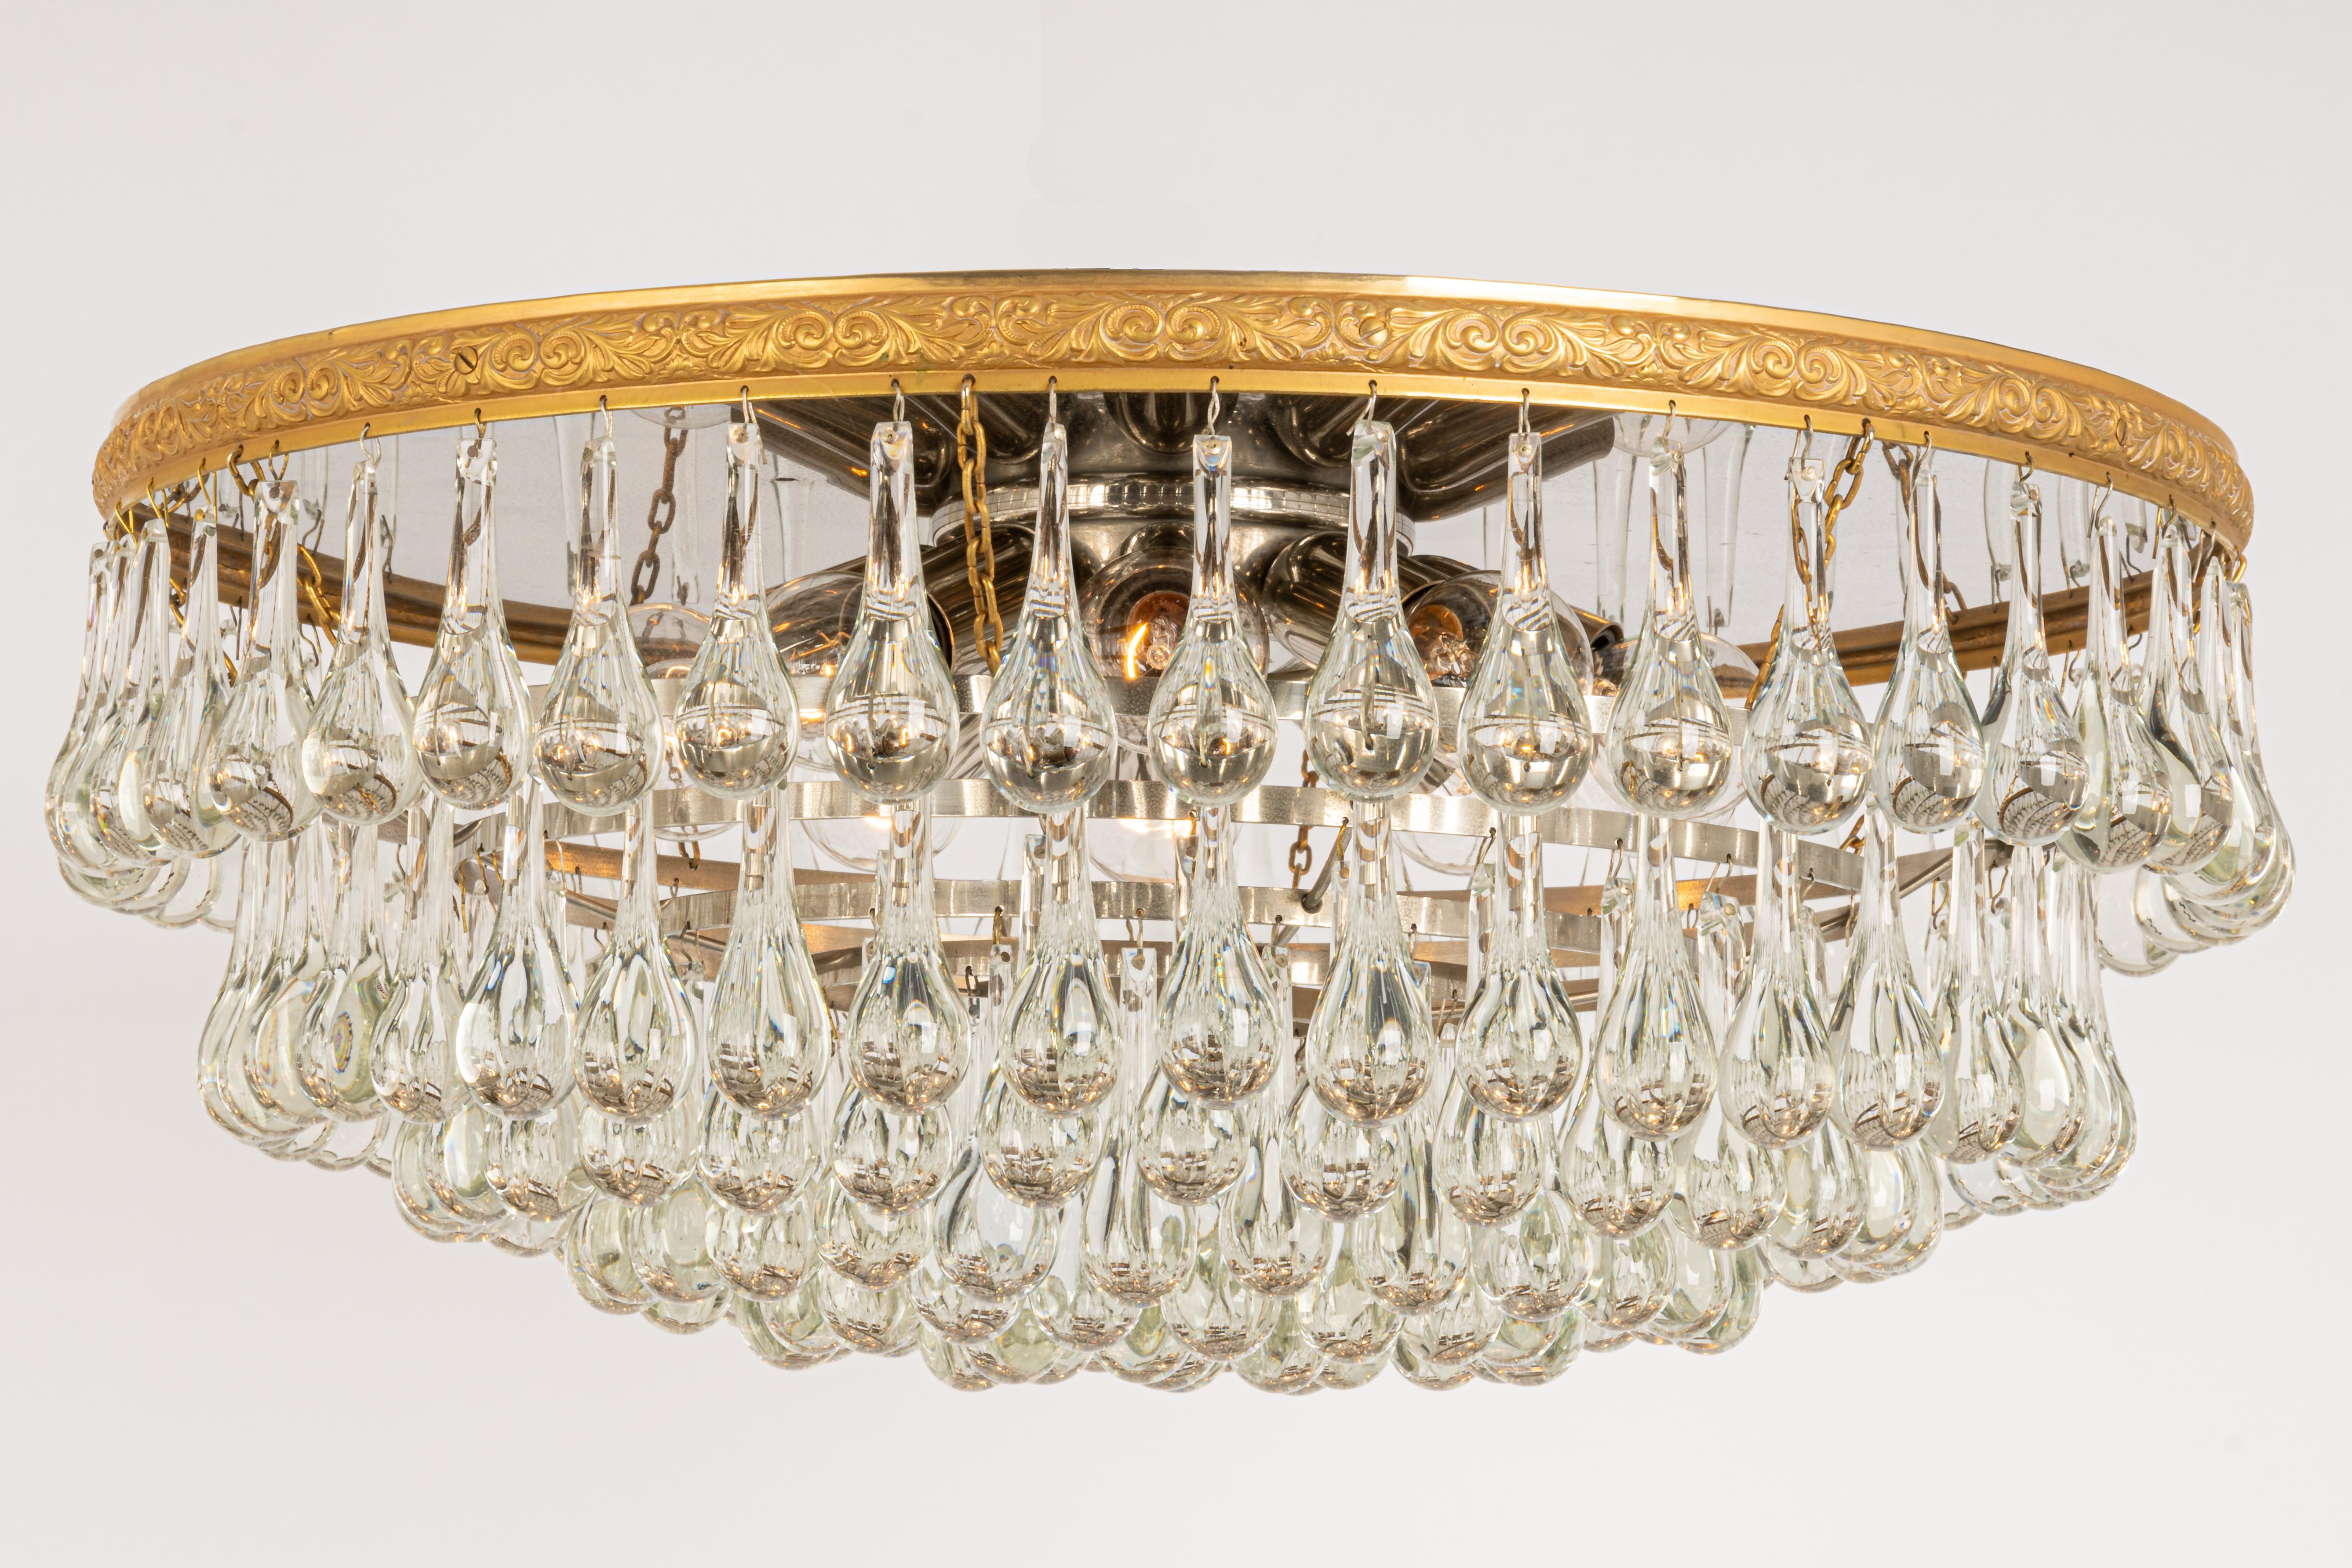 A stunning chandelier by Christoph Palme, Germany, manufactured in 1970s. It’s composed of Murano tear drop glass pieces on metal /brass frame.
High quality of materials.

Sockets: It needs 10 x E14 base bulbs to illuminate. (max. 40 W for each